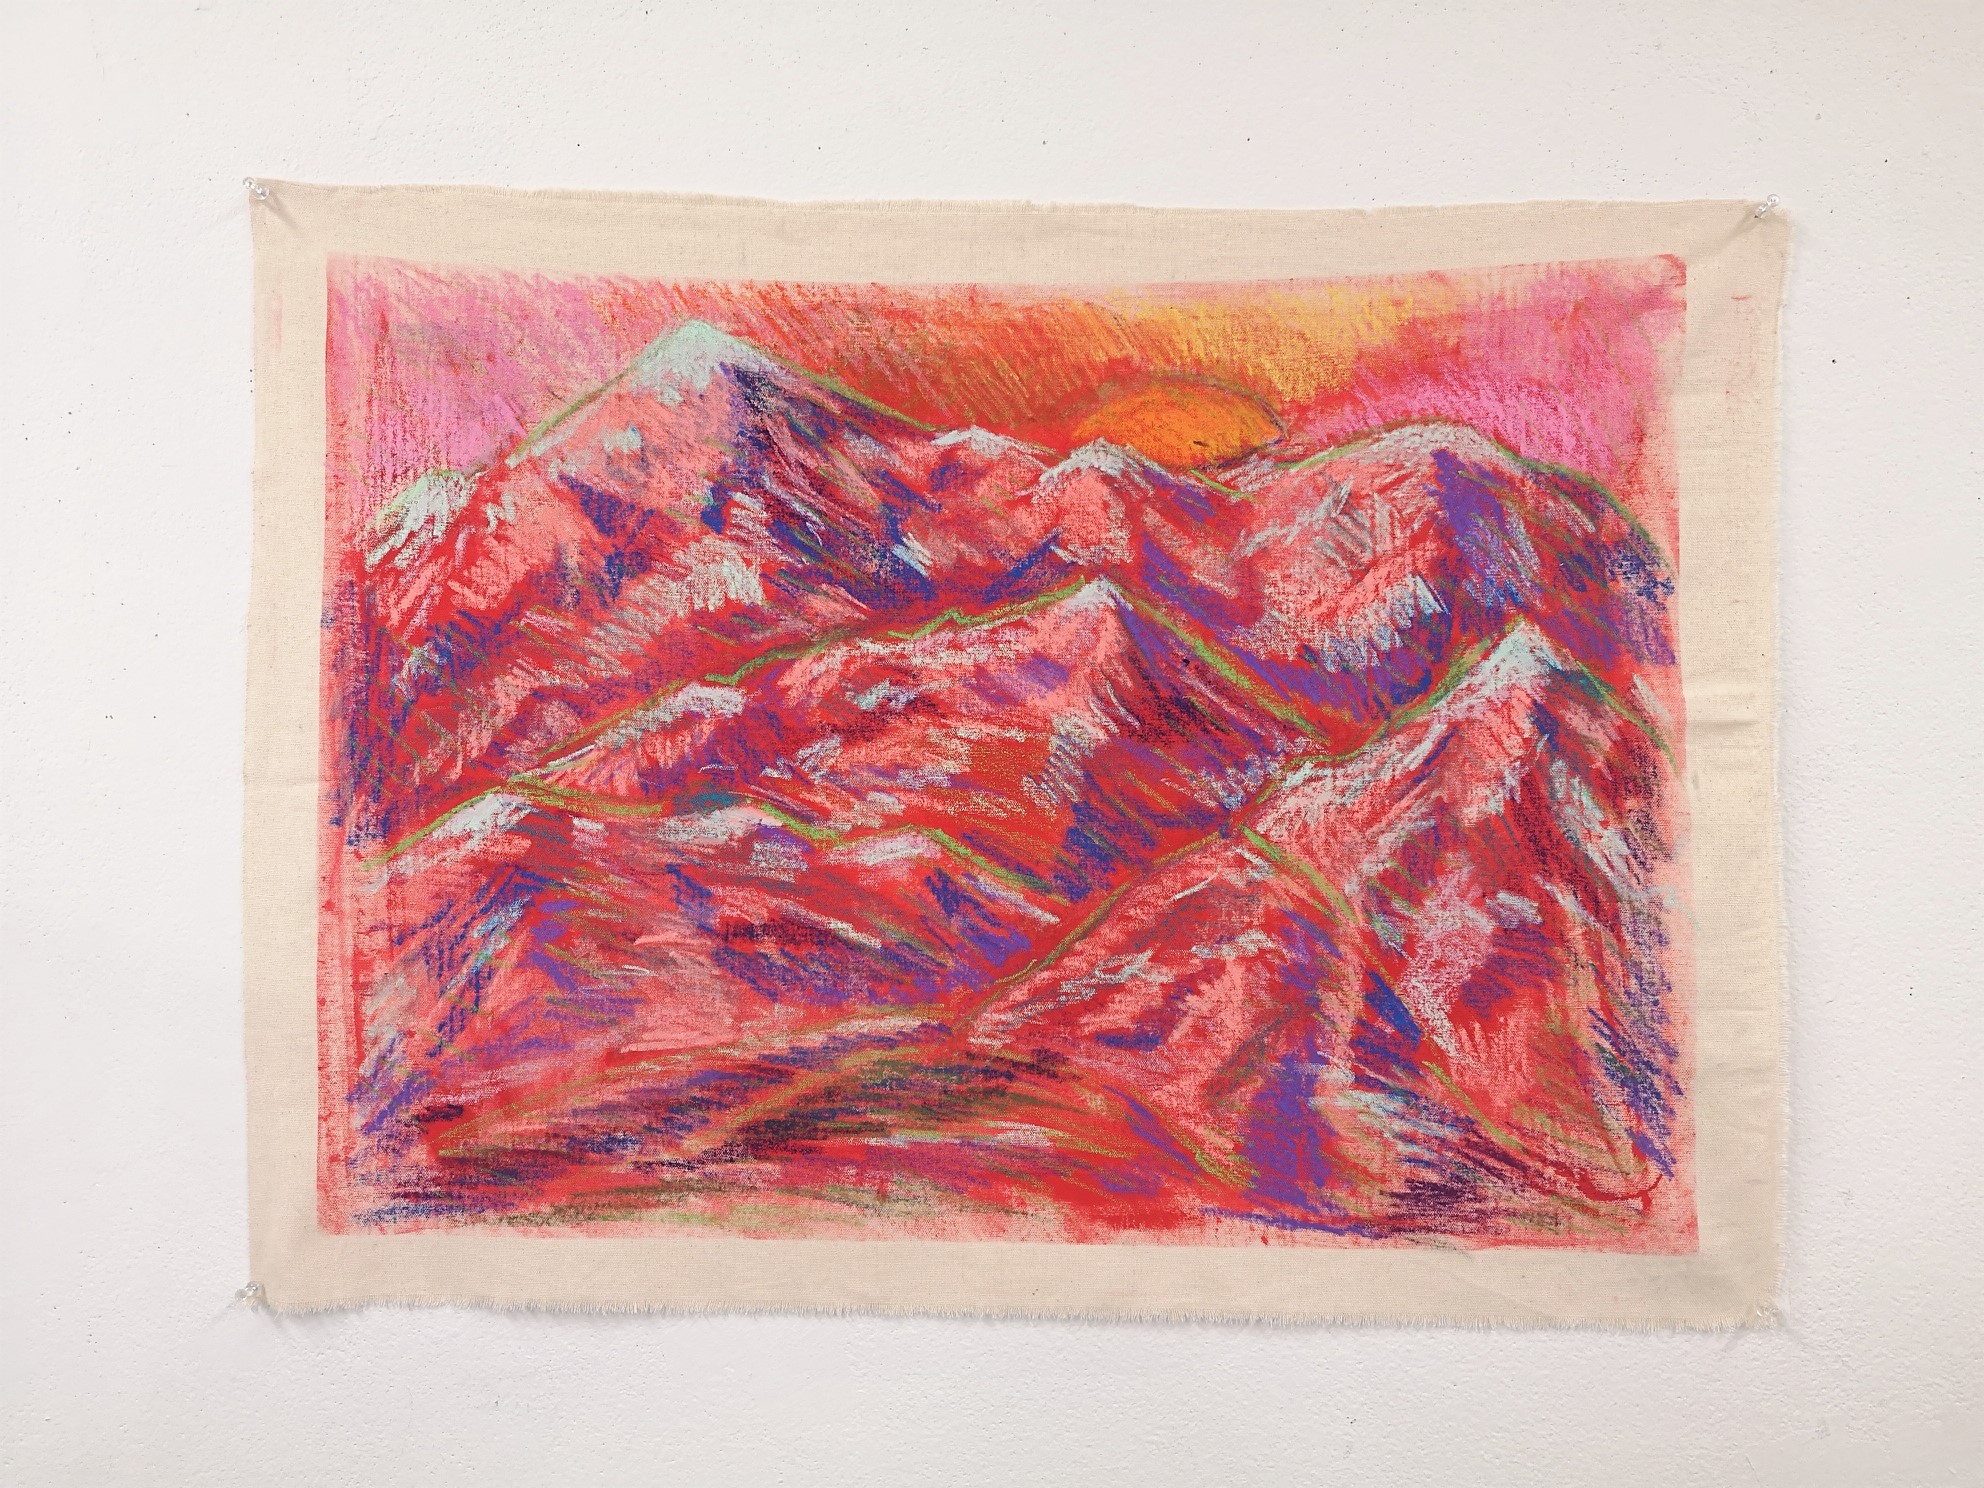 Painting of a mountain range, done in red with blue shading.